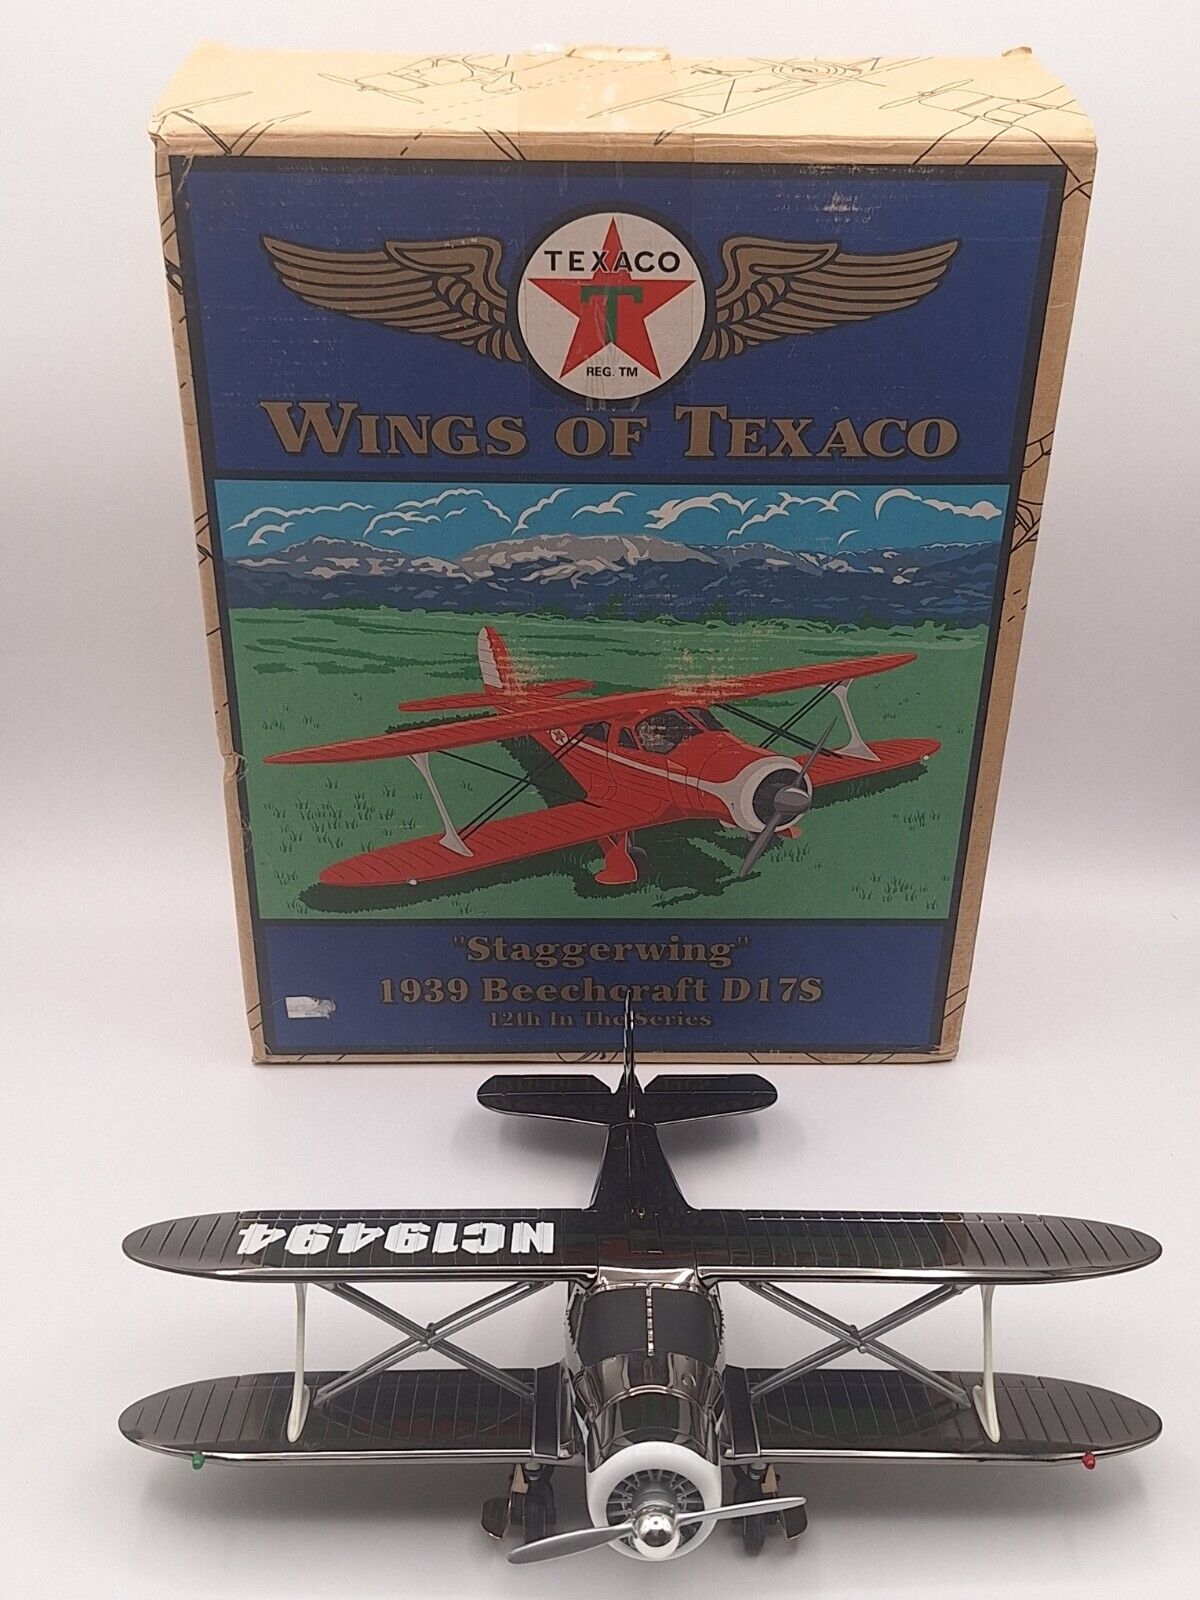 Wings Of Texaco “Staggerwing” 1939 Beechcraft D17S chrome finish, 12th In Series